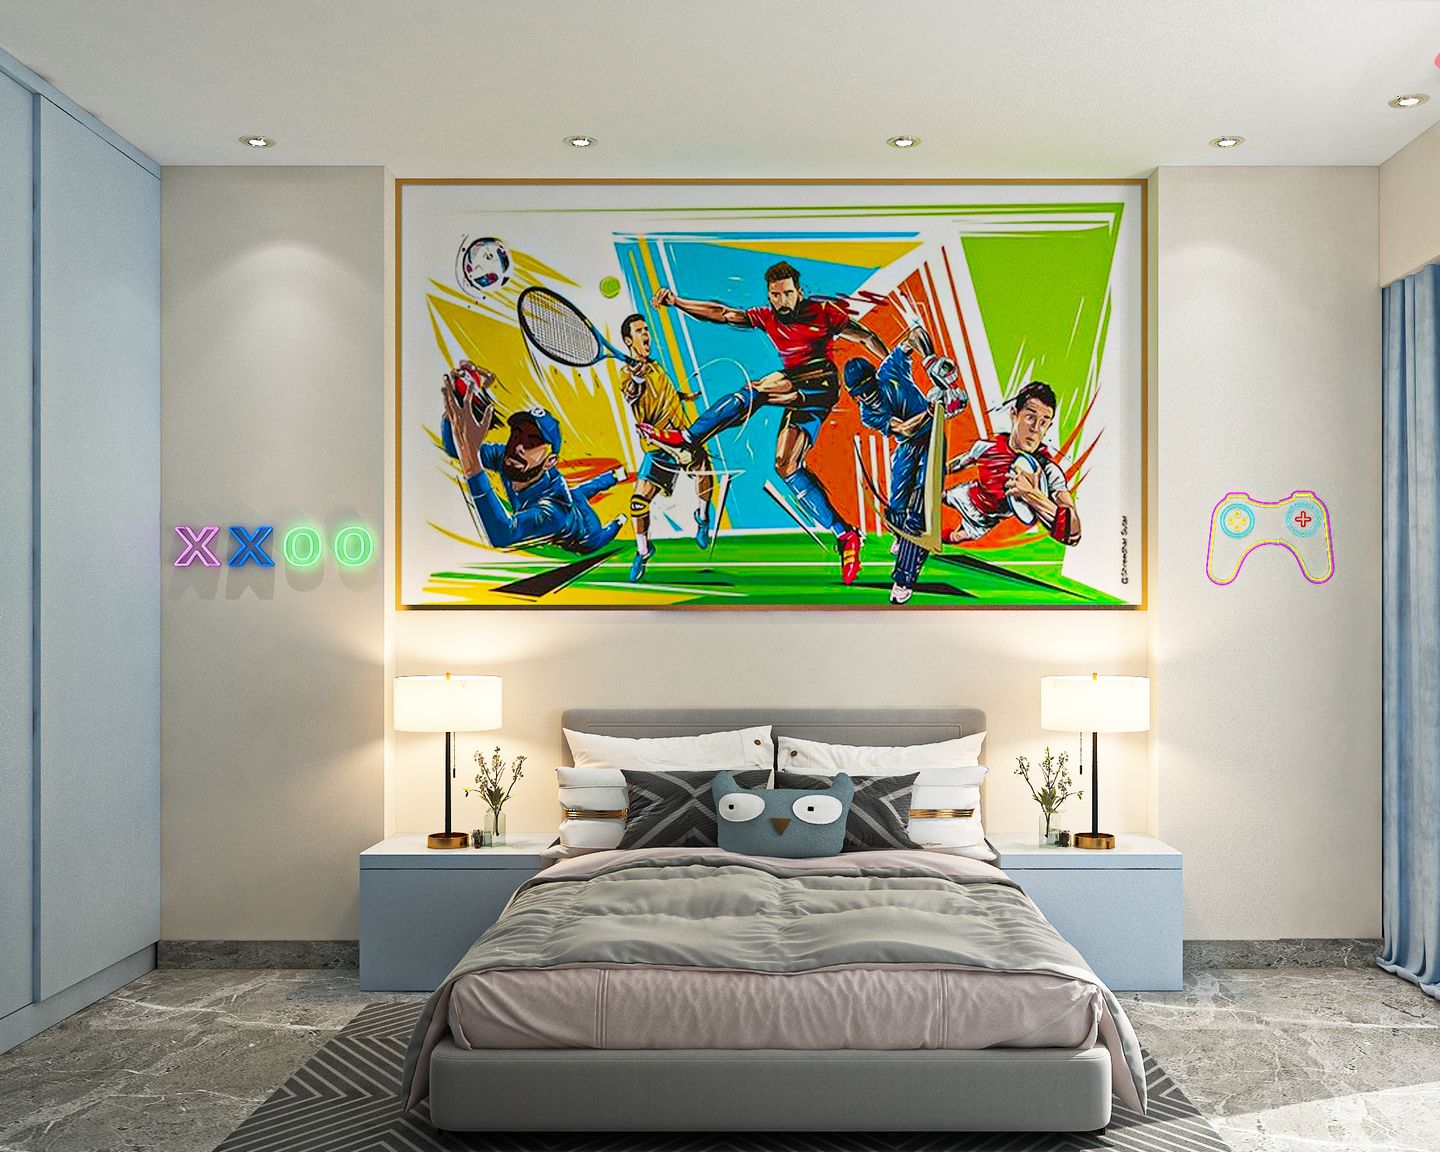 Kid's Bedroom Design With Sports Painting - Livspace